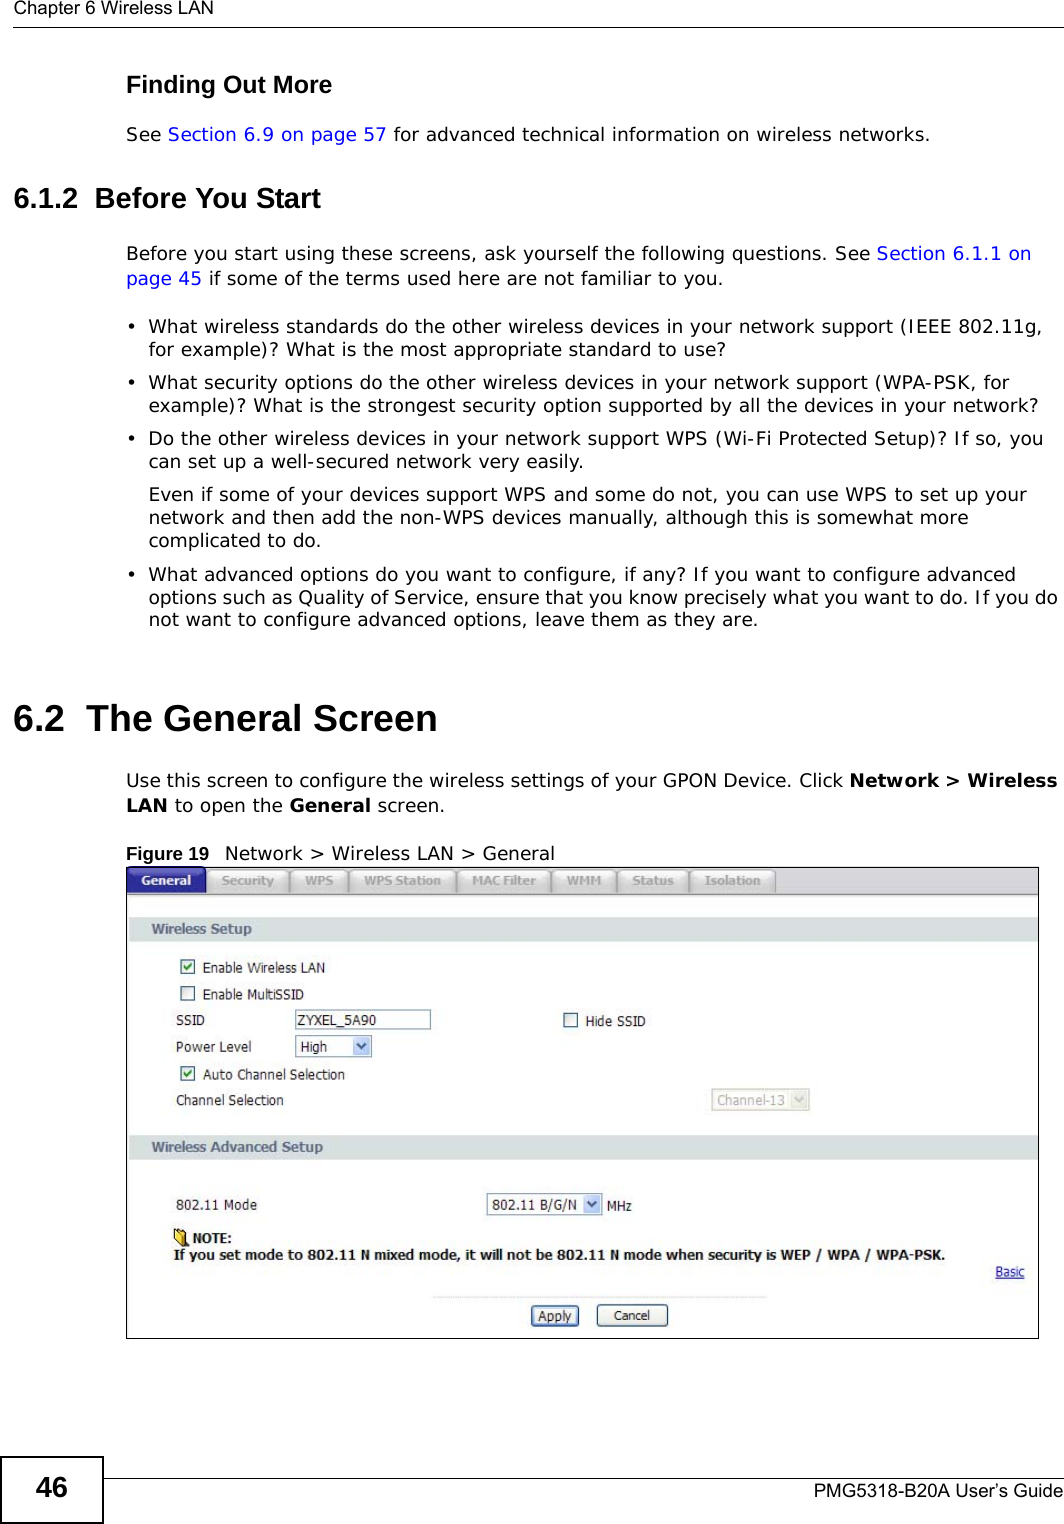 Chapter 6 Wireless LANPMG5318-B20A User’s Guide46Finding Out MoreSee Section 6.9 on page 57 for advanced technical information on wireless networks.6.1.2  Before You StartBefore you start using these screens, ask yourself the following questions. See Section 6.1.1 on page 45 if some of the terms used here are not familiar to you.• What wireless standards do the other wireless devices in your network support (IEEE 802.11g, for example)? What is the most appropriate standard to use?• What security options do the other wireless devices in your network support (WPA-PSK, for example)? What is the strongest security option supported by all the devices in your network?• Do the other wireless devices in your network support WPS (Wi-Fi Protected Setup)? If so, you can set up a well-secured network very easily. Even if some of your devices support WPS and some do not, you can use WPS to set up your network and then add the non-WPS devices manually, although this is somewhat more complicated to do.• What advanced options do you want to configure, if any? If you want to configure advanced options such as Quality of Service, ensure that you know precisely what you want to do. If you do not want to configure advanced options, leave them as they are.6.2  The General ScreenUse this screen to configure the wireless settings of your GPON Device. Click Network &gt; Wireless LAN to open the General screen.Figure 19   Network &gt; Wireless LAN &gt; General 